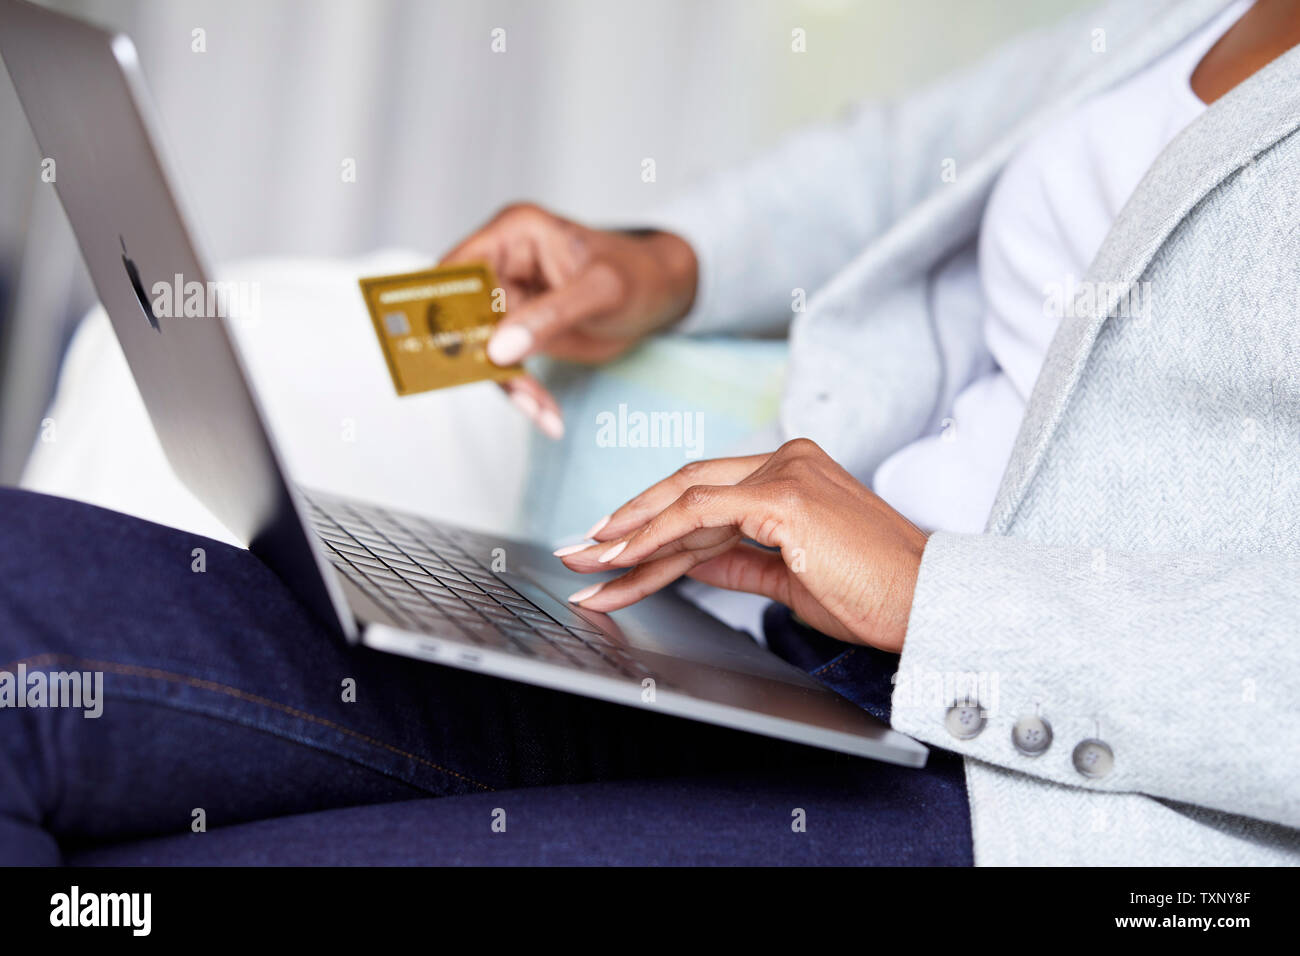 Ethnic woman shopping online using laptop Banque D'Images